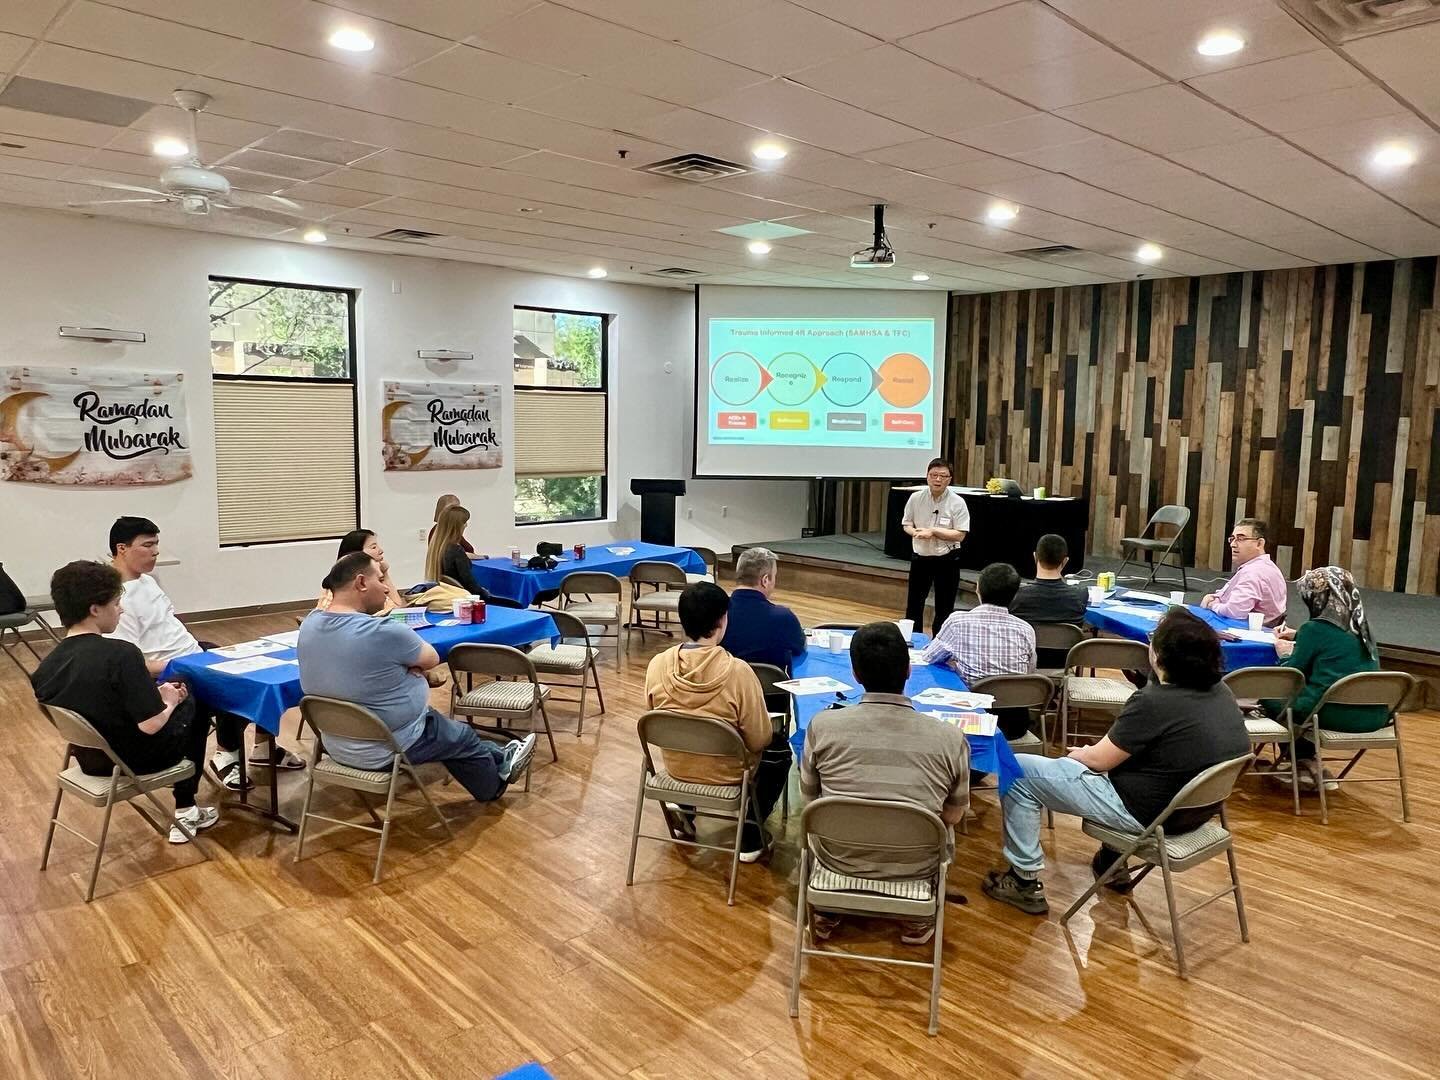 Creating Communities of Belonging journey continued at SEMA Foundation with a great turnout, discussion, and future commitment! Thanks to CEO Gokhan Dorum and SEMA, who Maricopa County Department of Public Health and The Faithful City (TFC) recognize